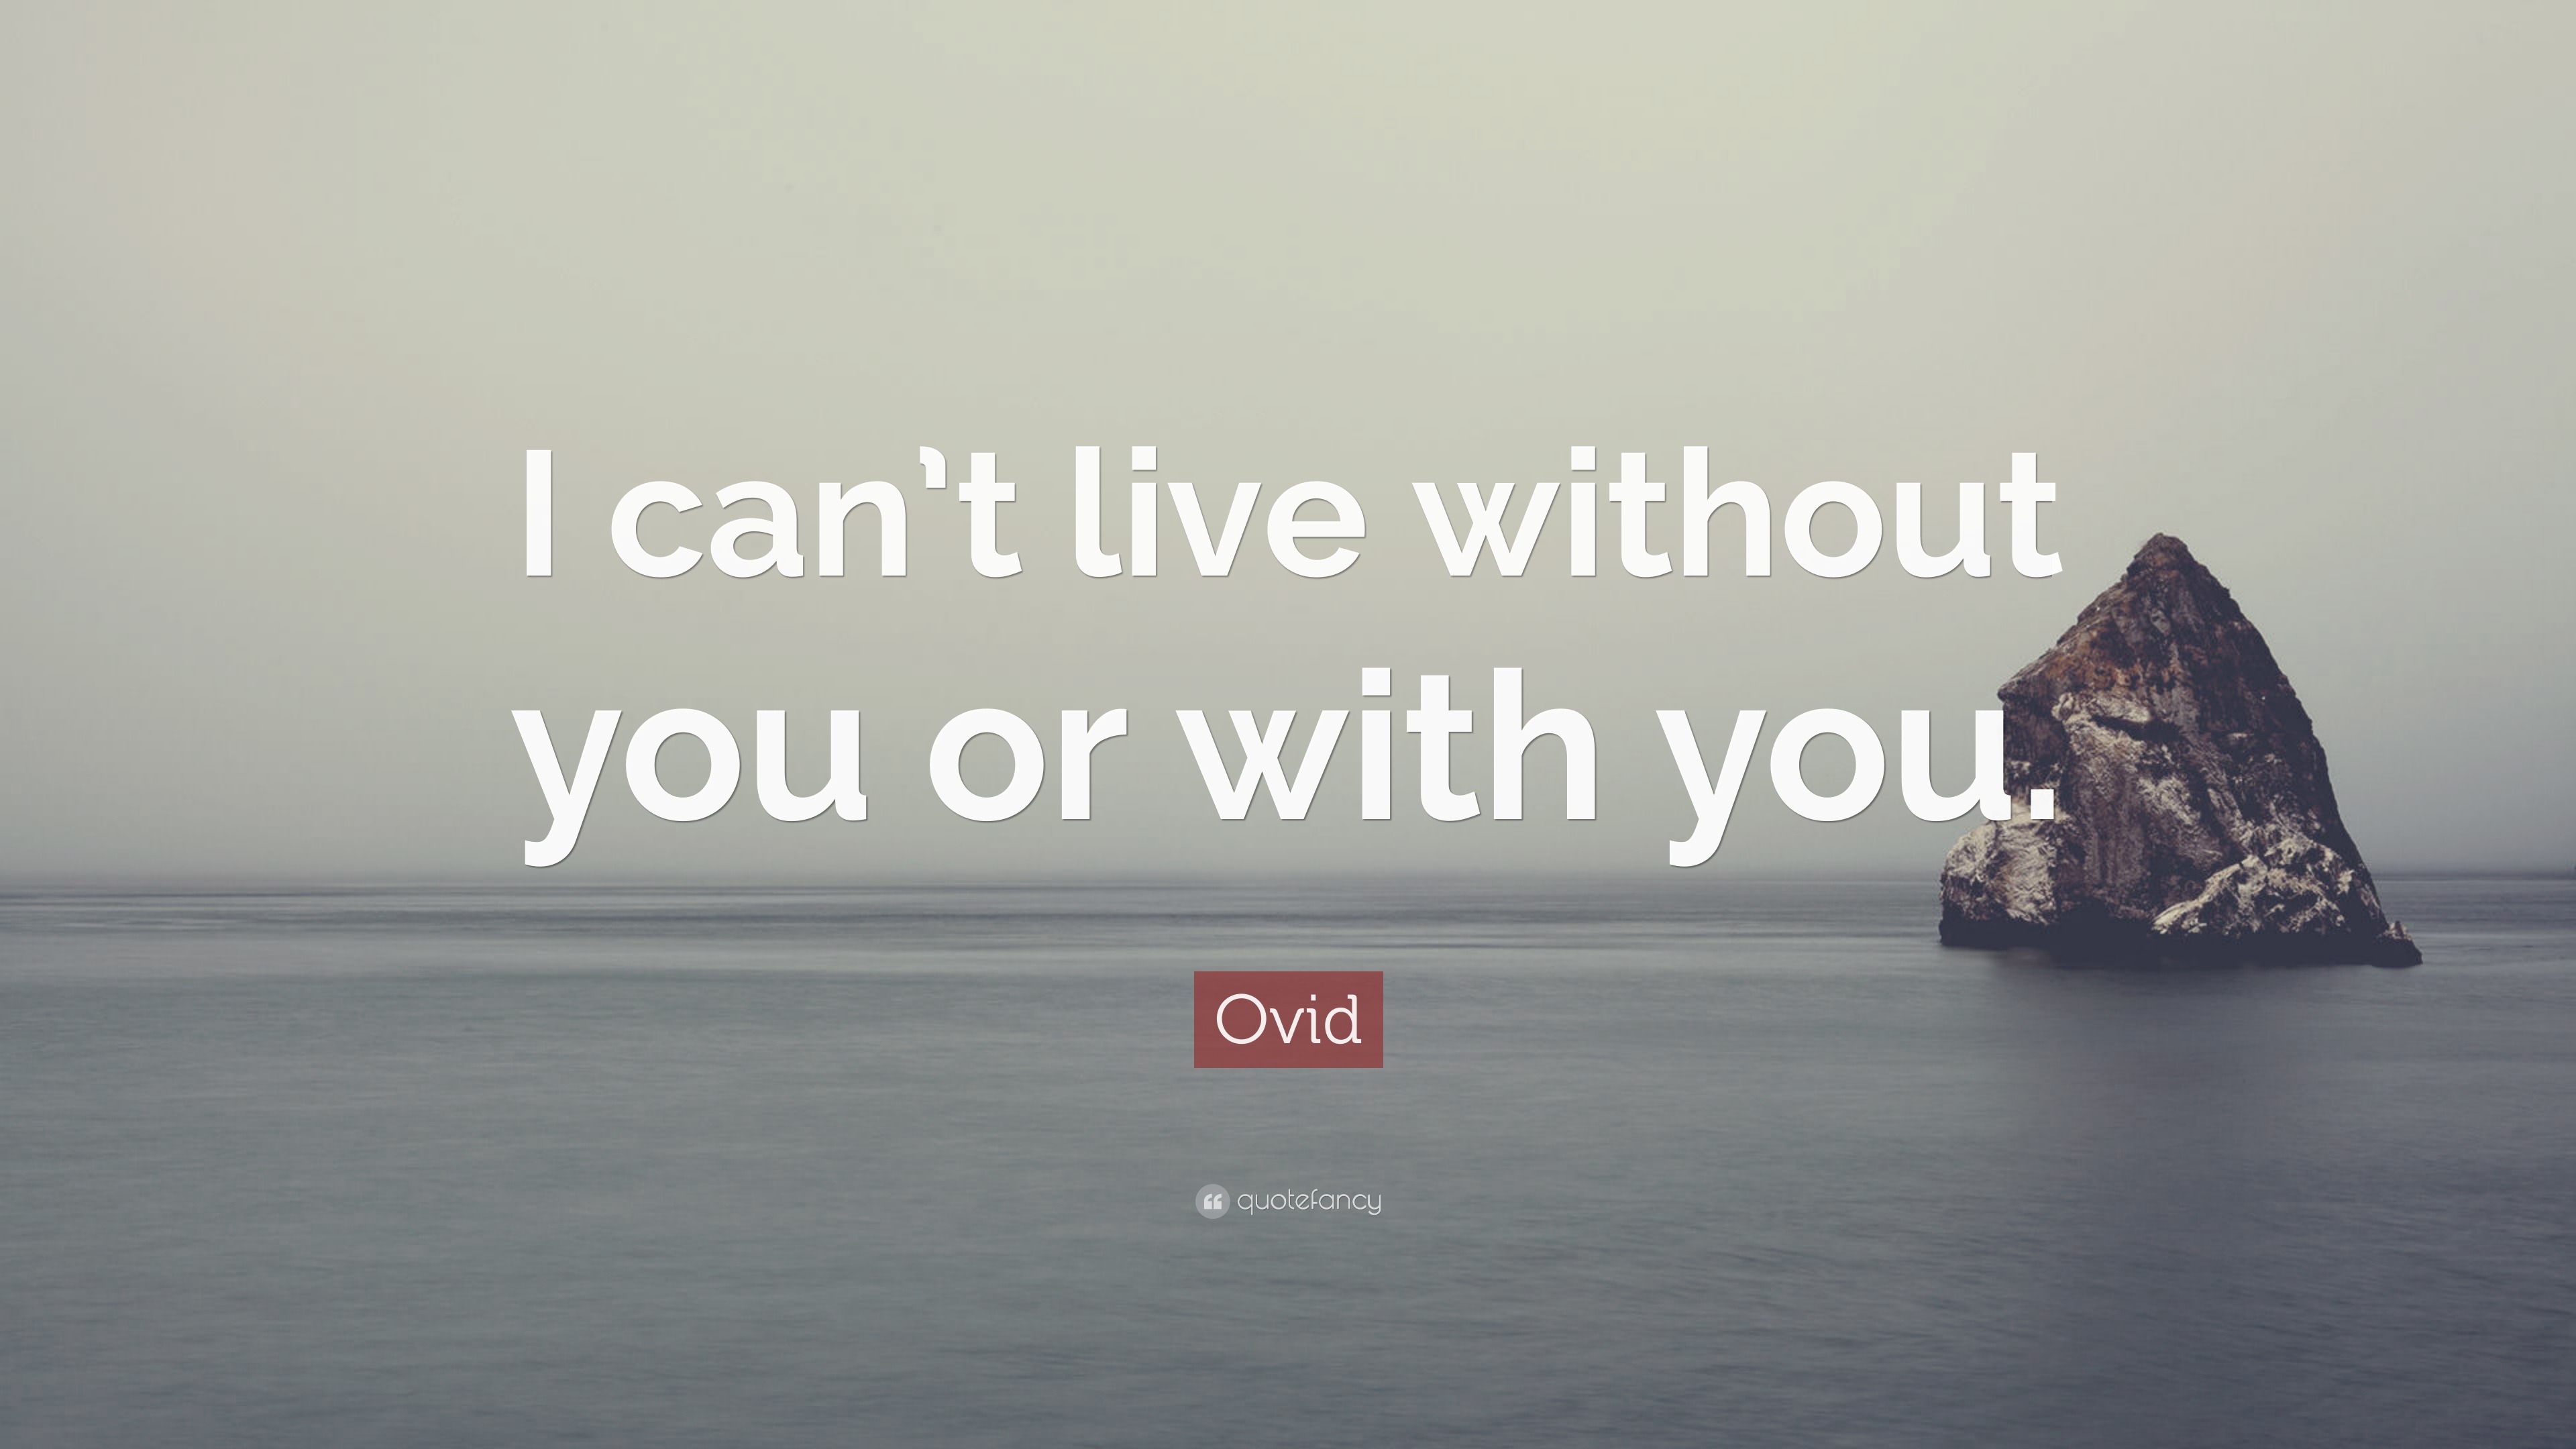 Ovid Quote: "I can’t live without you or with you. 